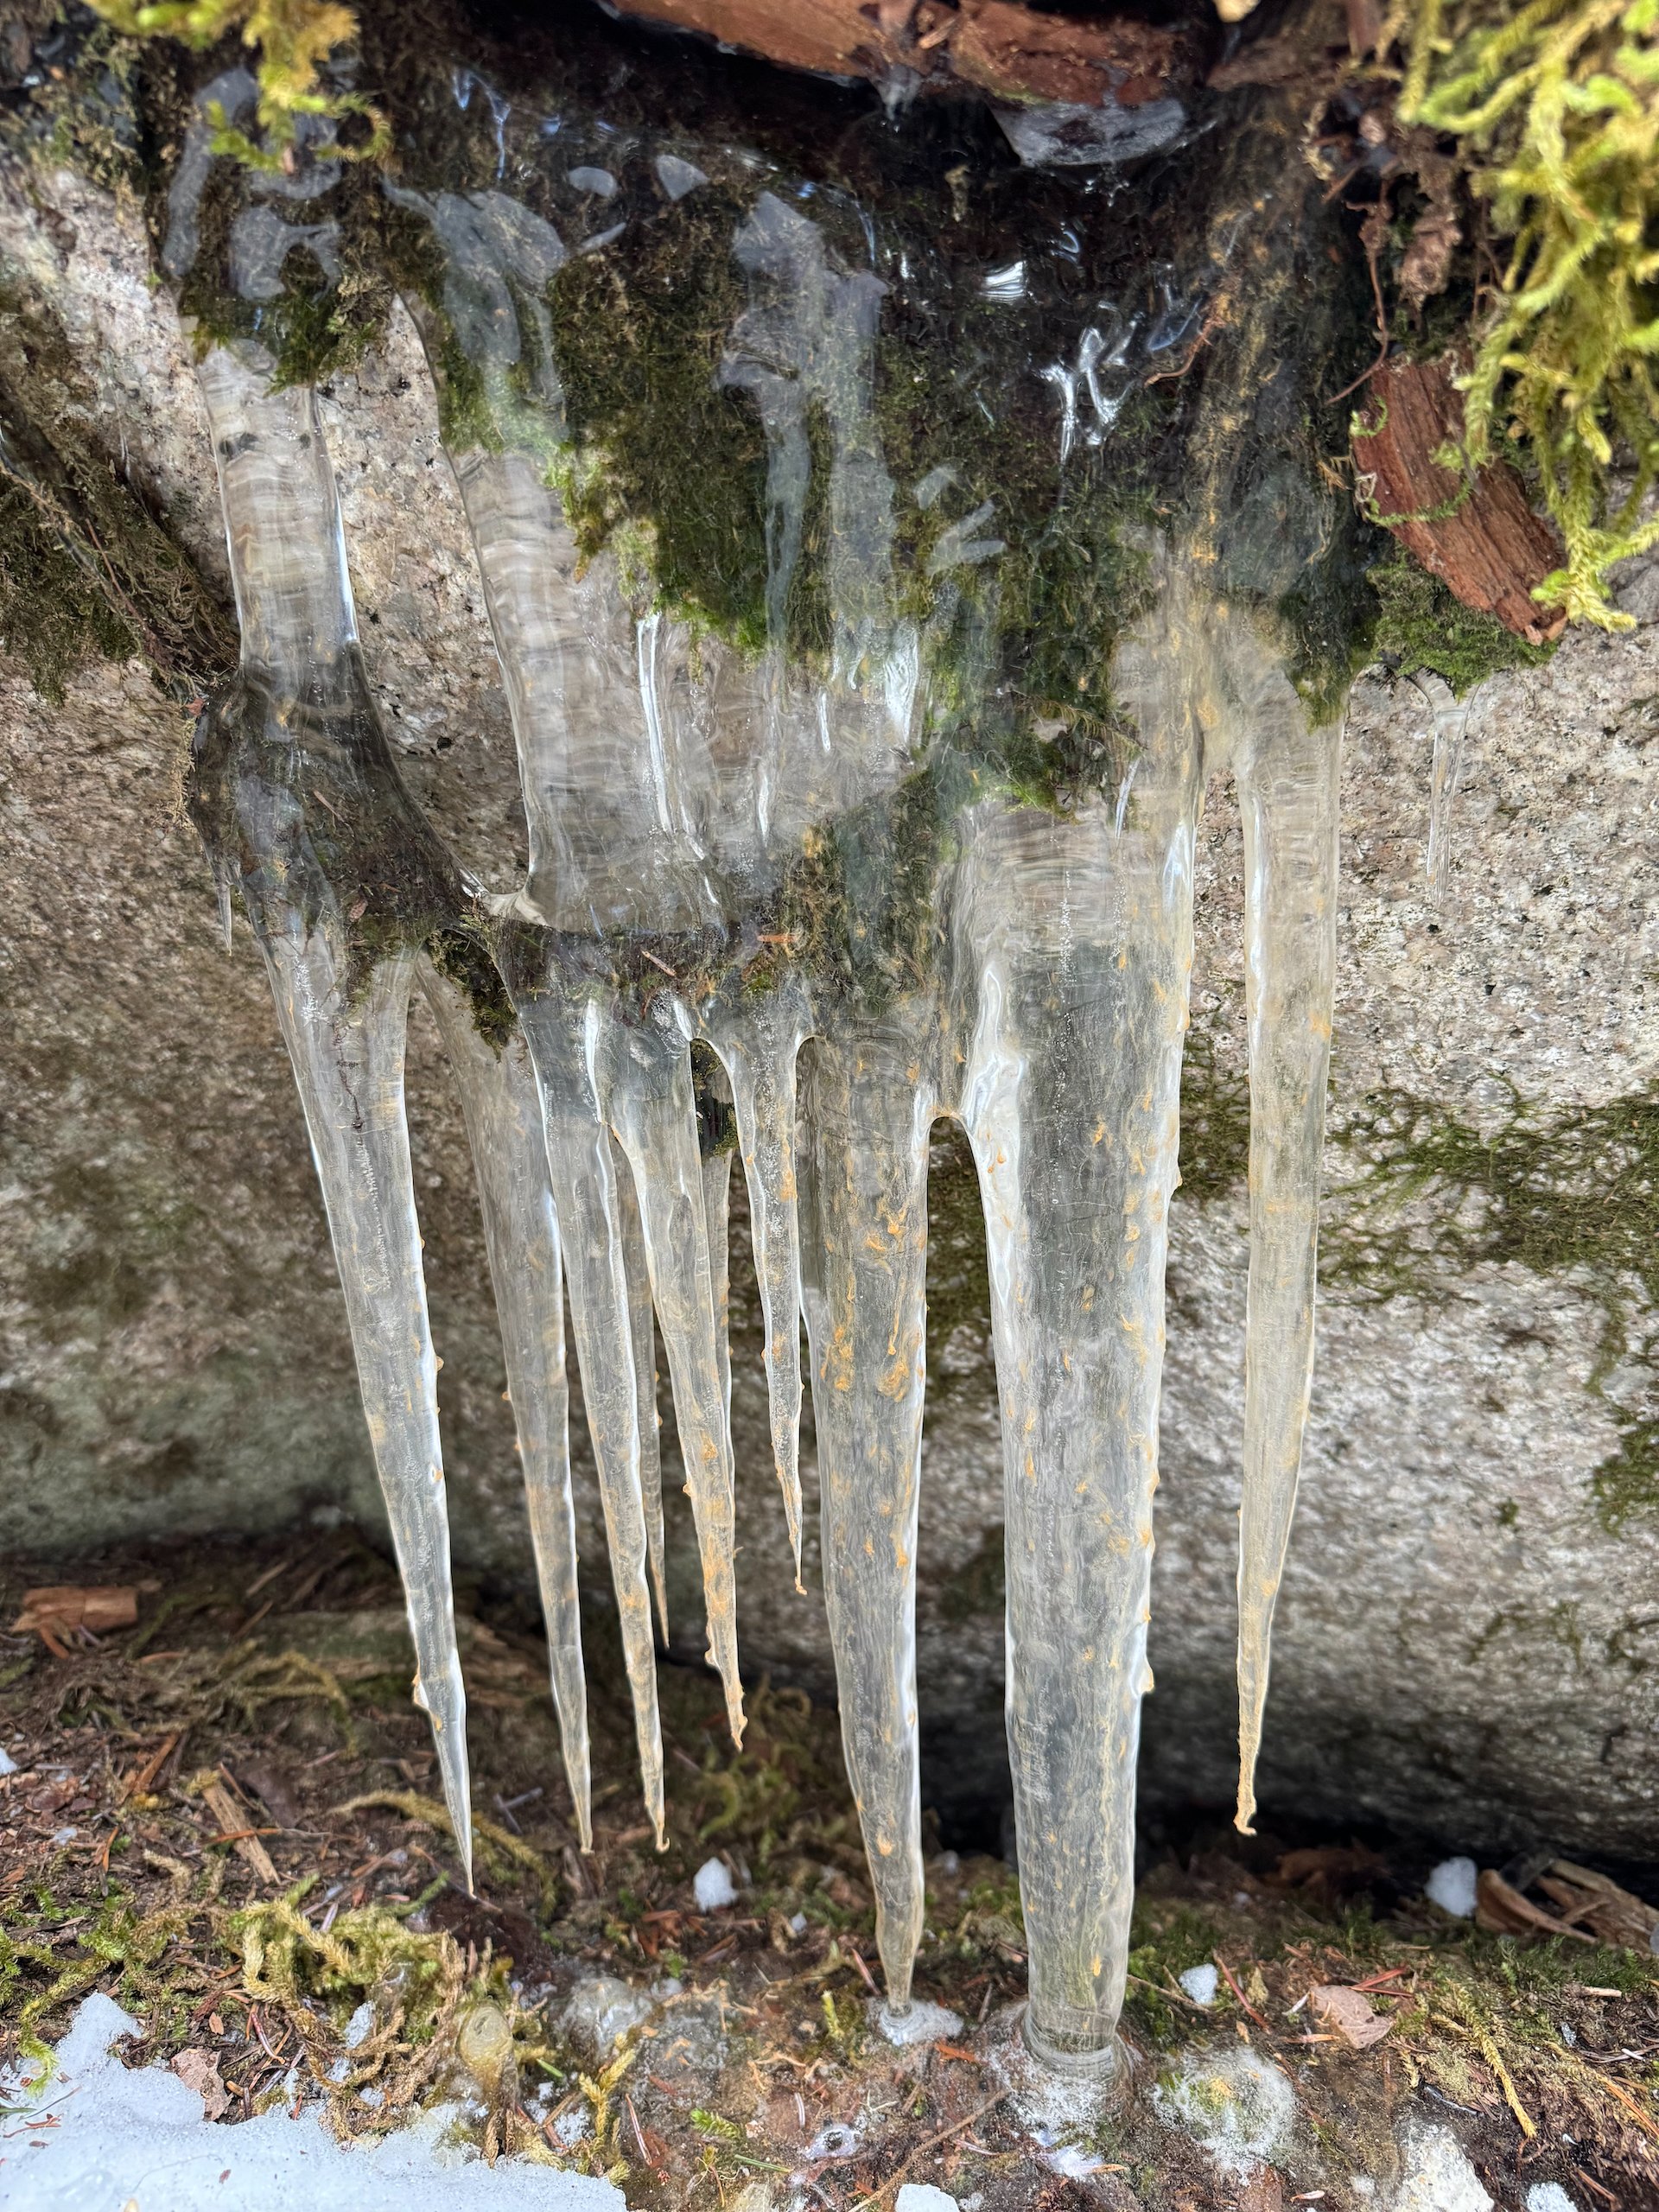  Even the moss was encased in ice. 